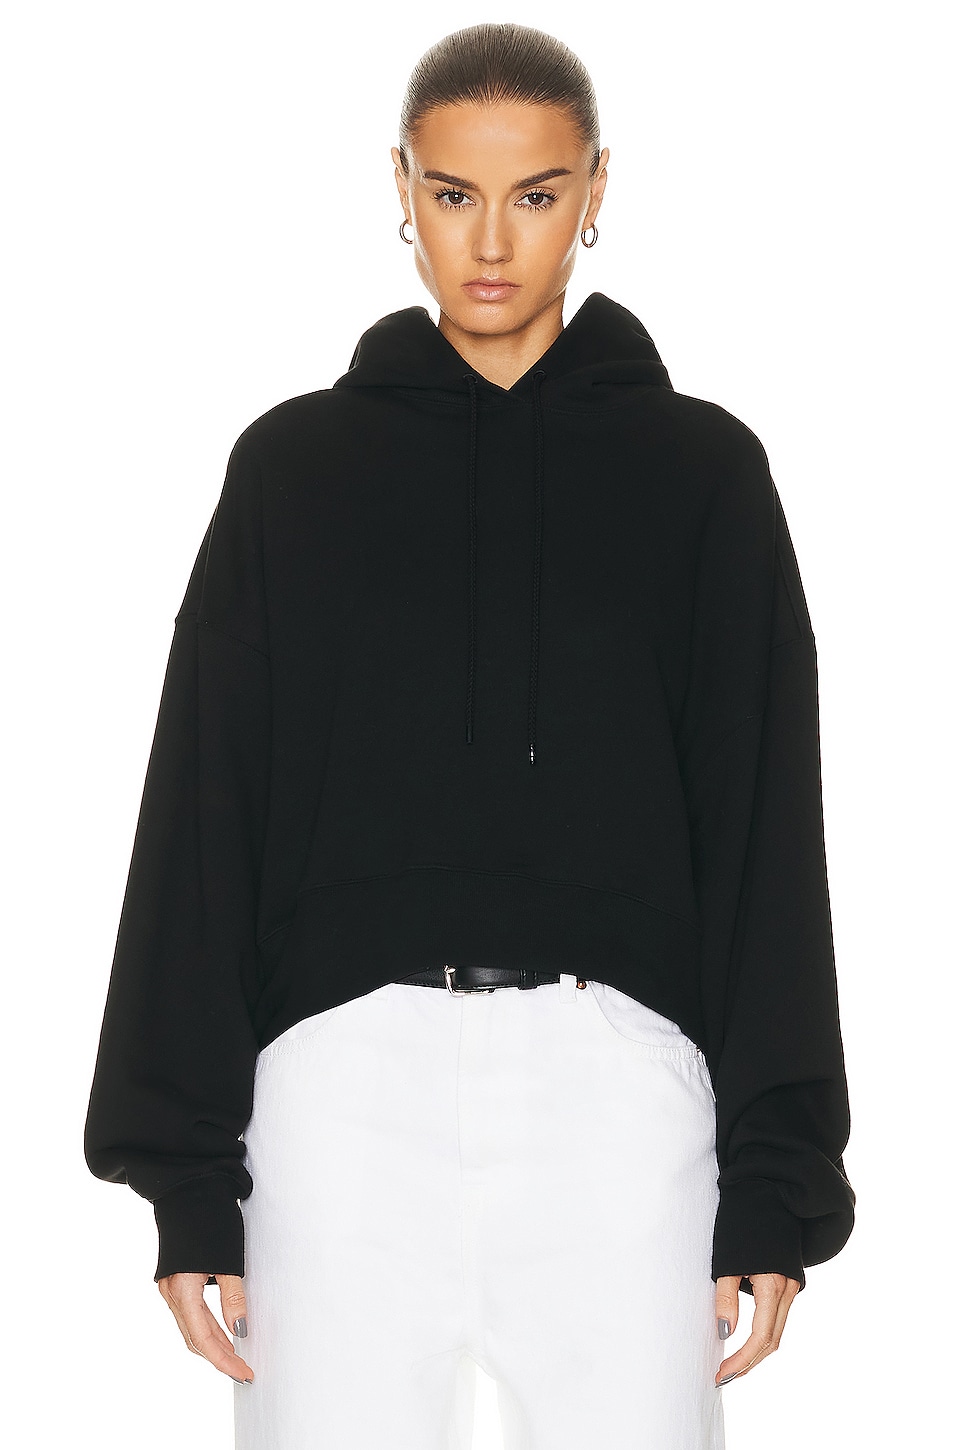 Image 1 of WARDROBE.NYC Oversize Hooded Top in Black